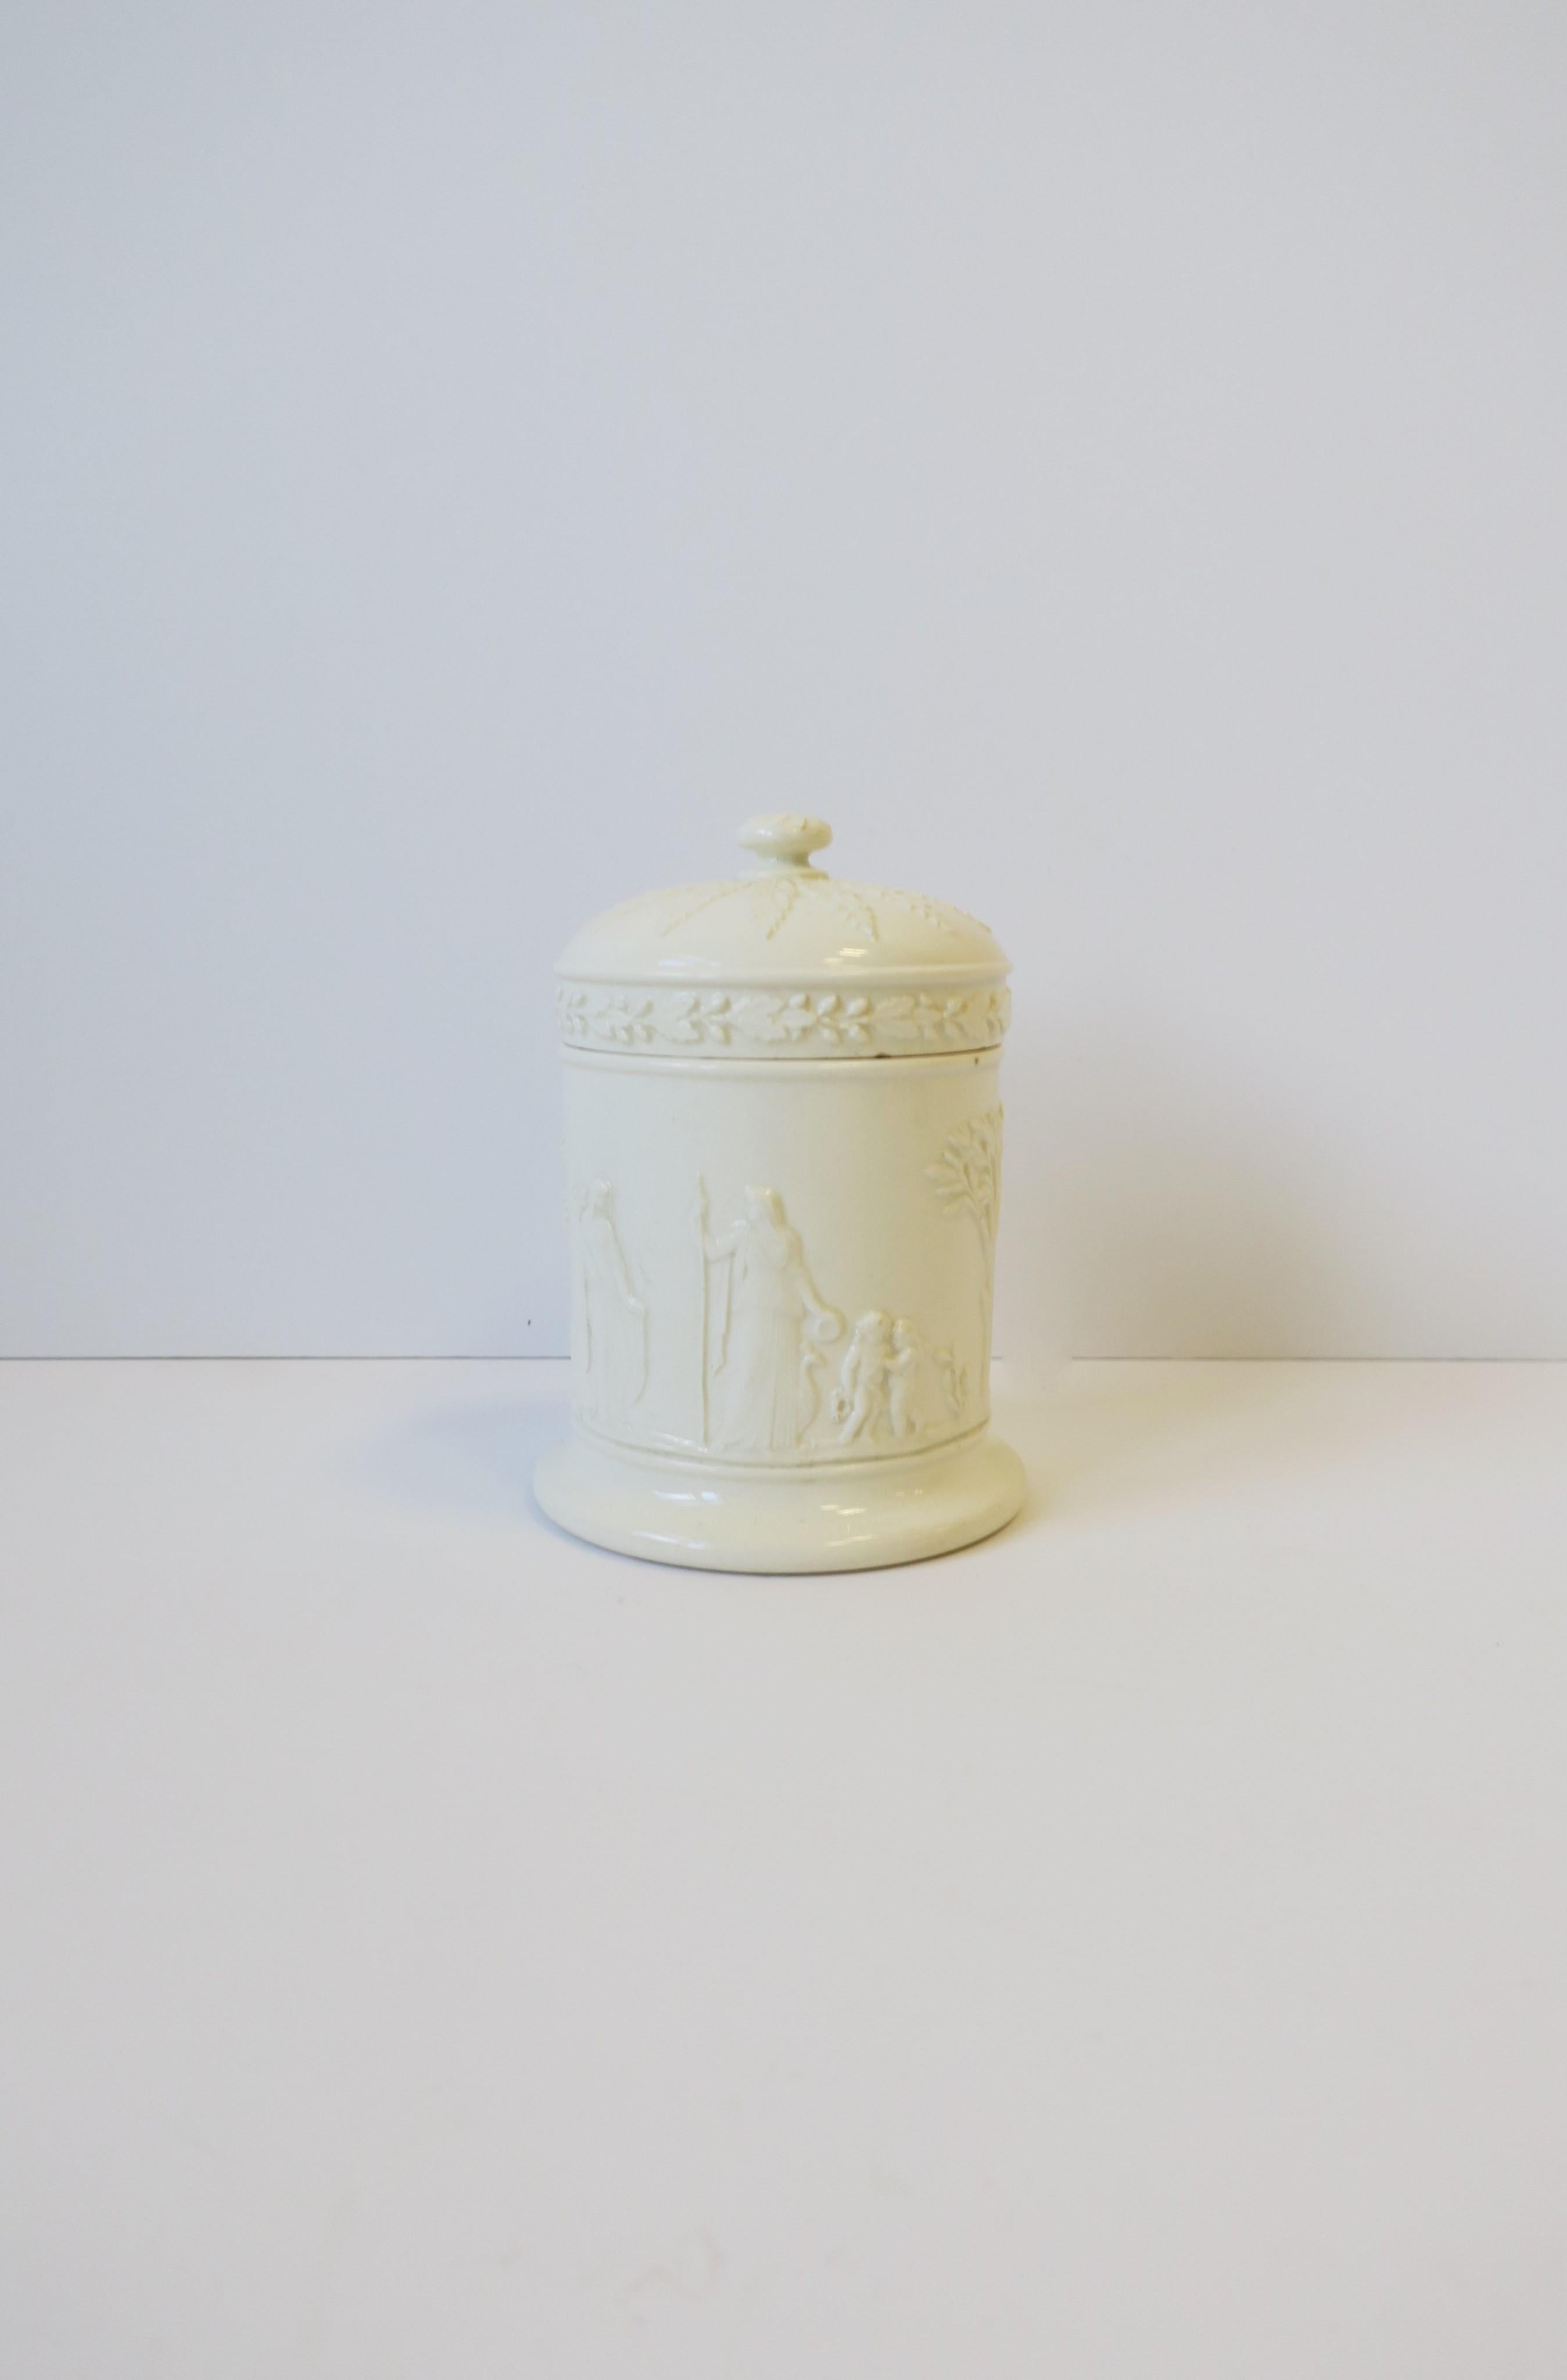 A beautiful off-white cream ceramic box jar with lid by Wedgwood, in the Neoclassical style, circa mid-20th century, England. With marker's mark on bottom as shown in image #12. Great as a standalone piece or to hold small items on a vanity,